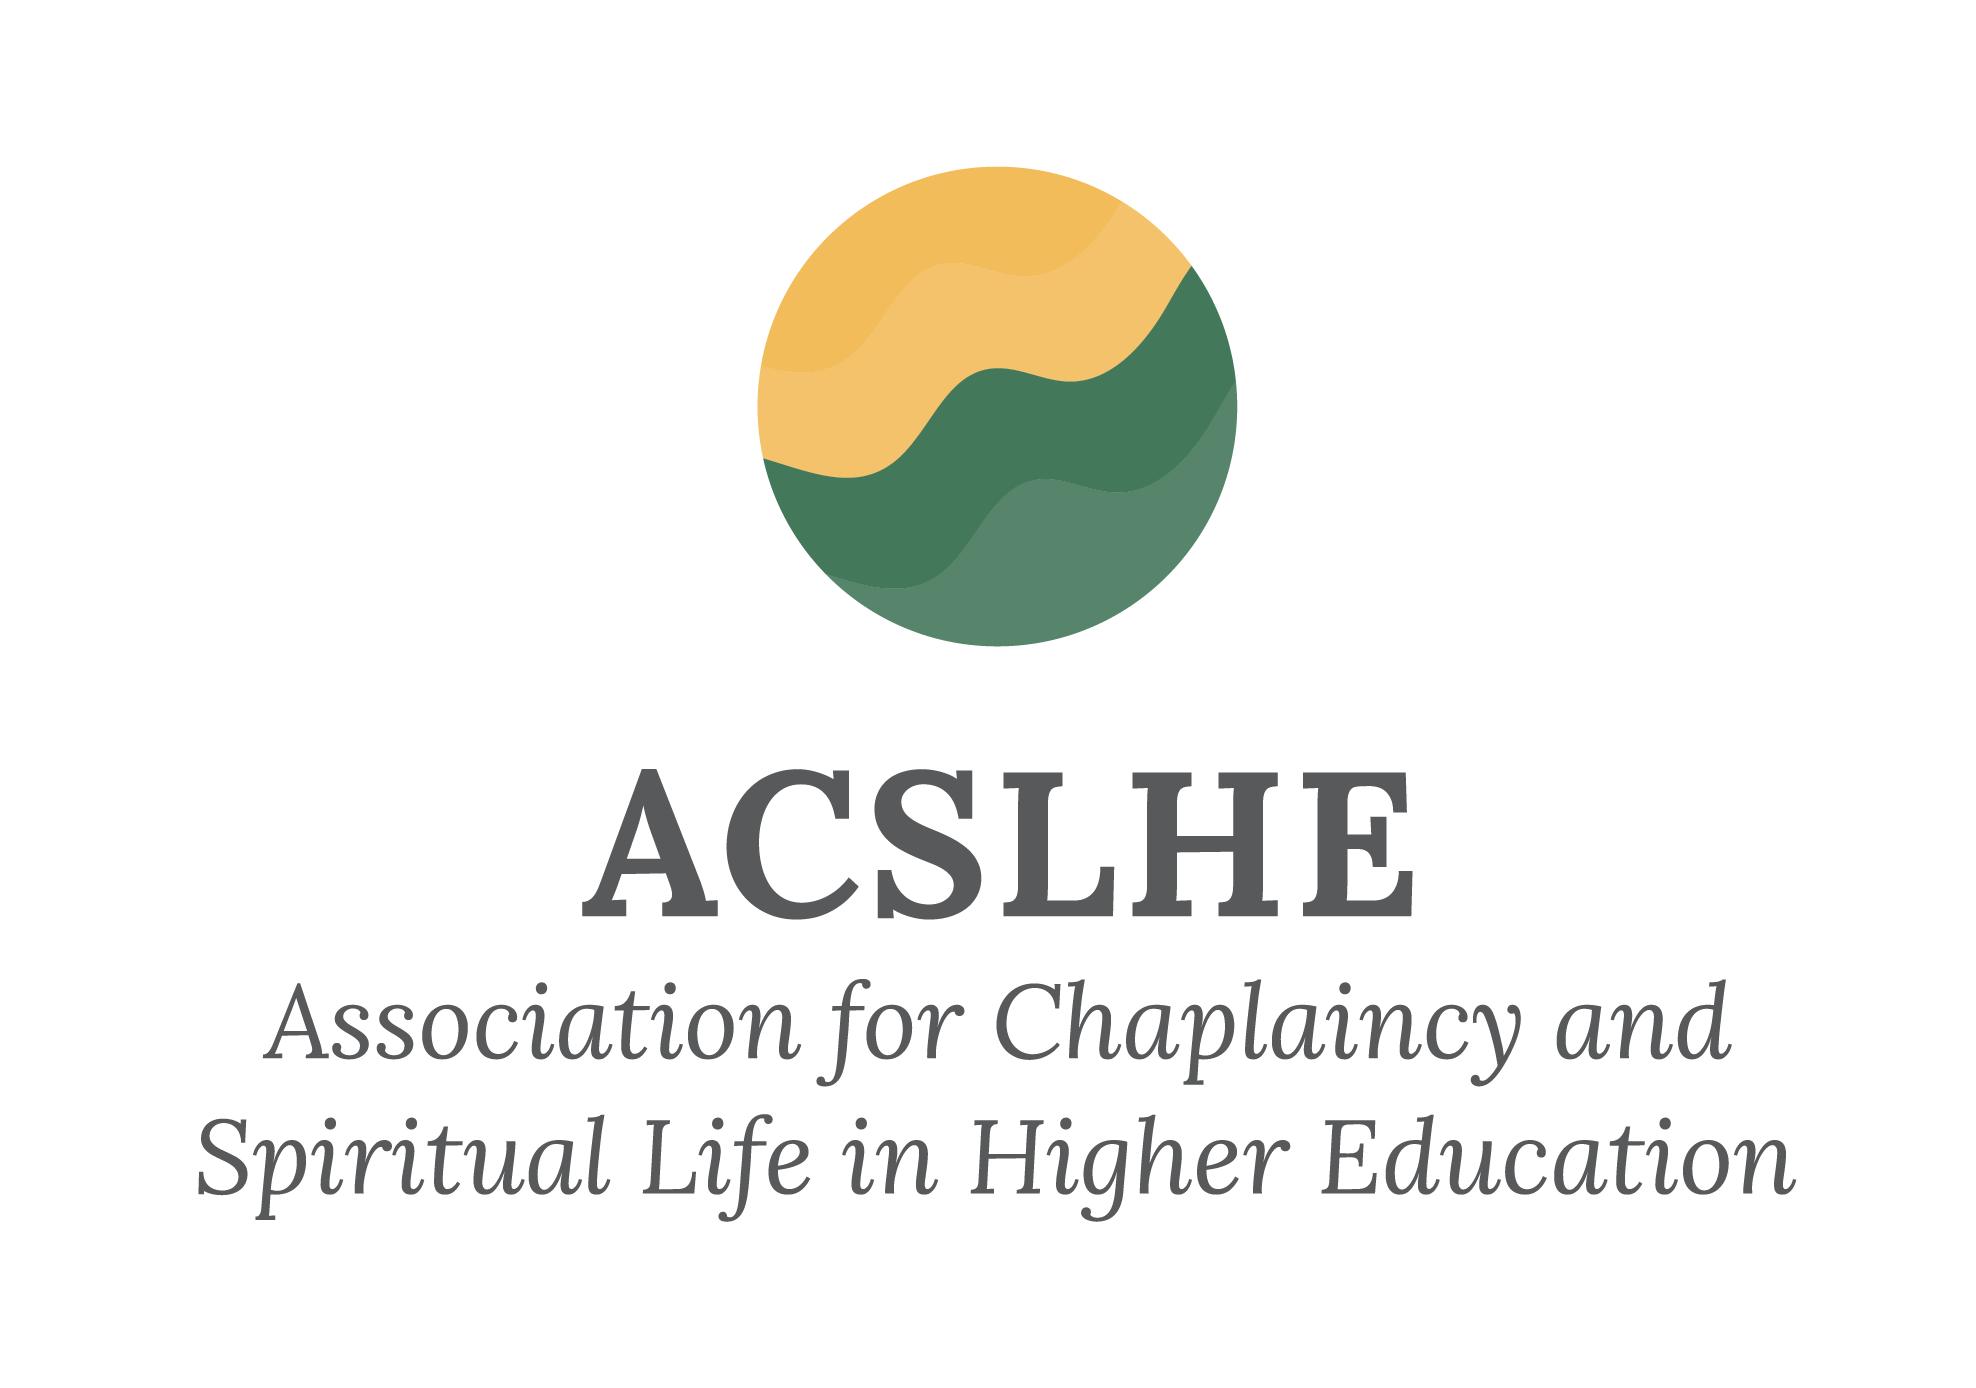 ACSLHE logo with yellow and green waves stacked over text Association for Chaplaincy and Spiritual Life in Higher Education